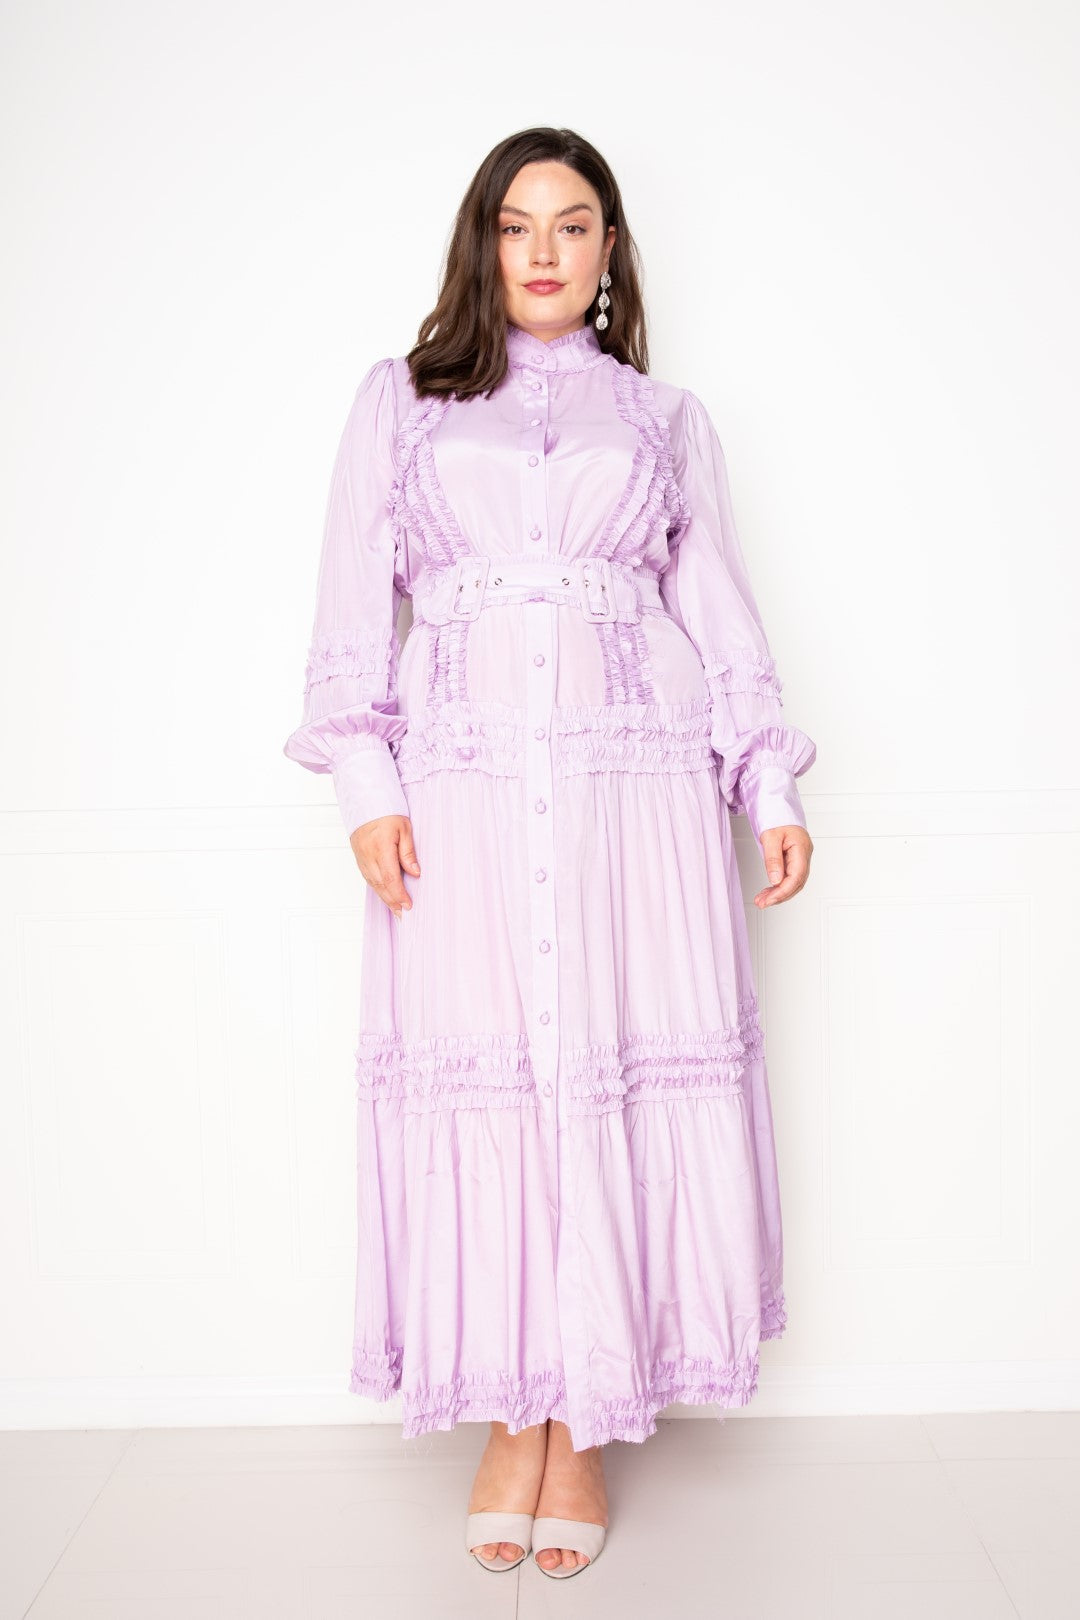 Plus Size Violet long Sleeve Button Down Belted Ruffle Flowy Maxi Dress Dresses jehouze 